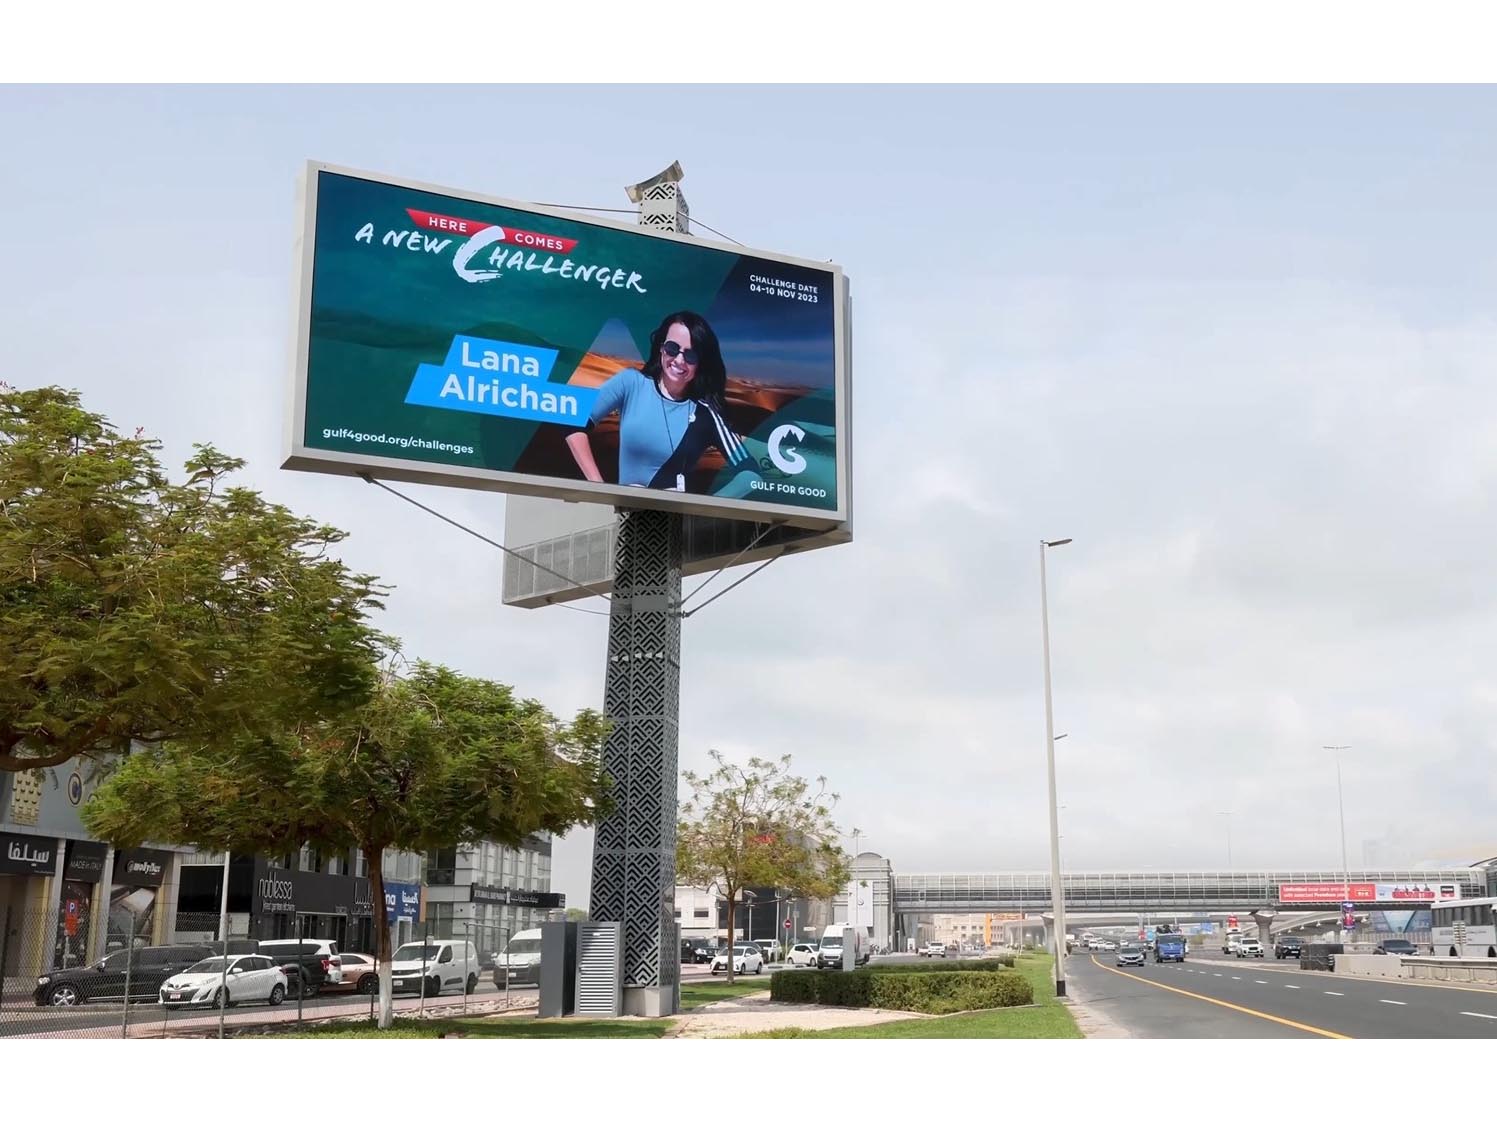 Gulf for Good introduces ‘Champions of Change’ on Sheikh Zayed Road